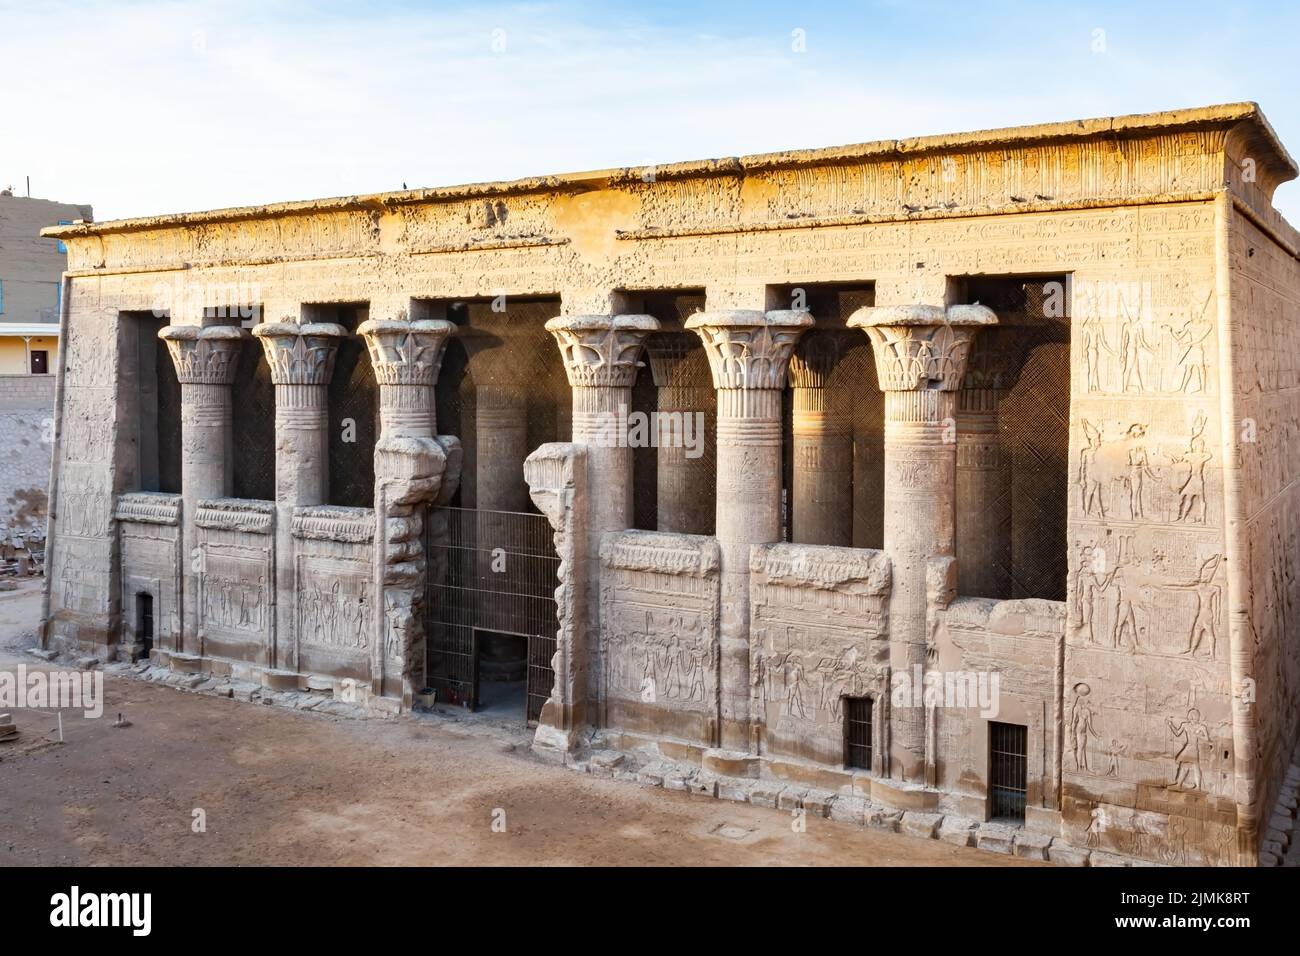 View of The Temple of Khnum, The Ram headed egyptian god. Stock Photo